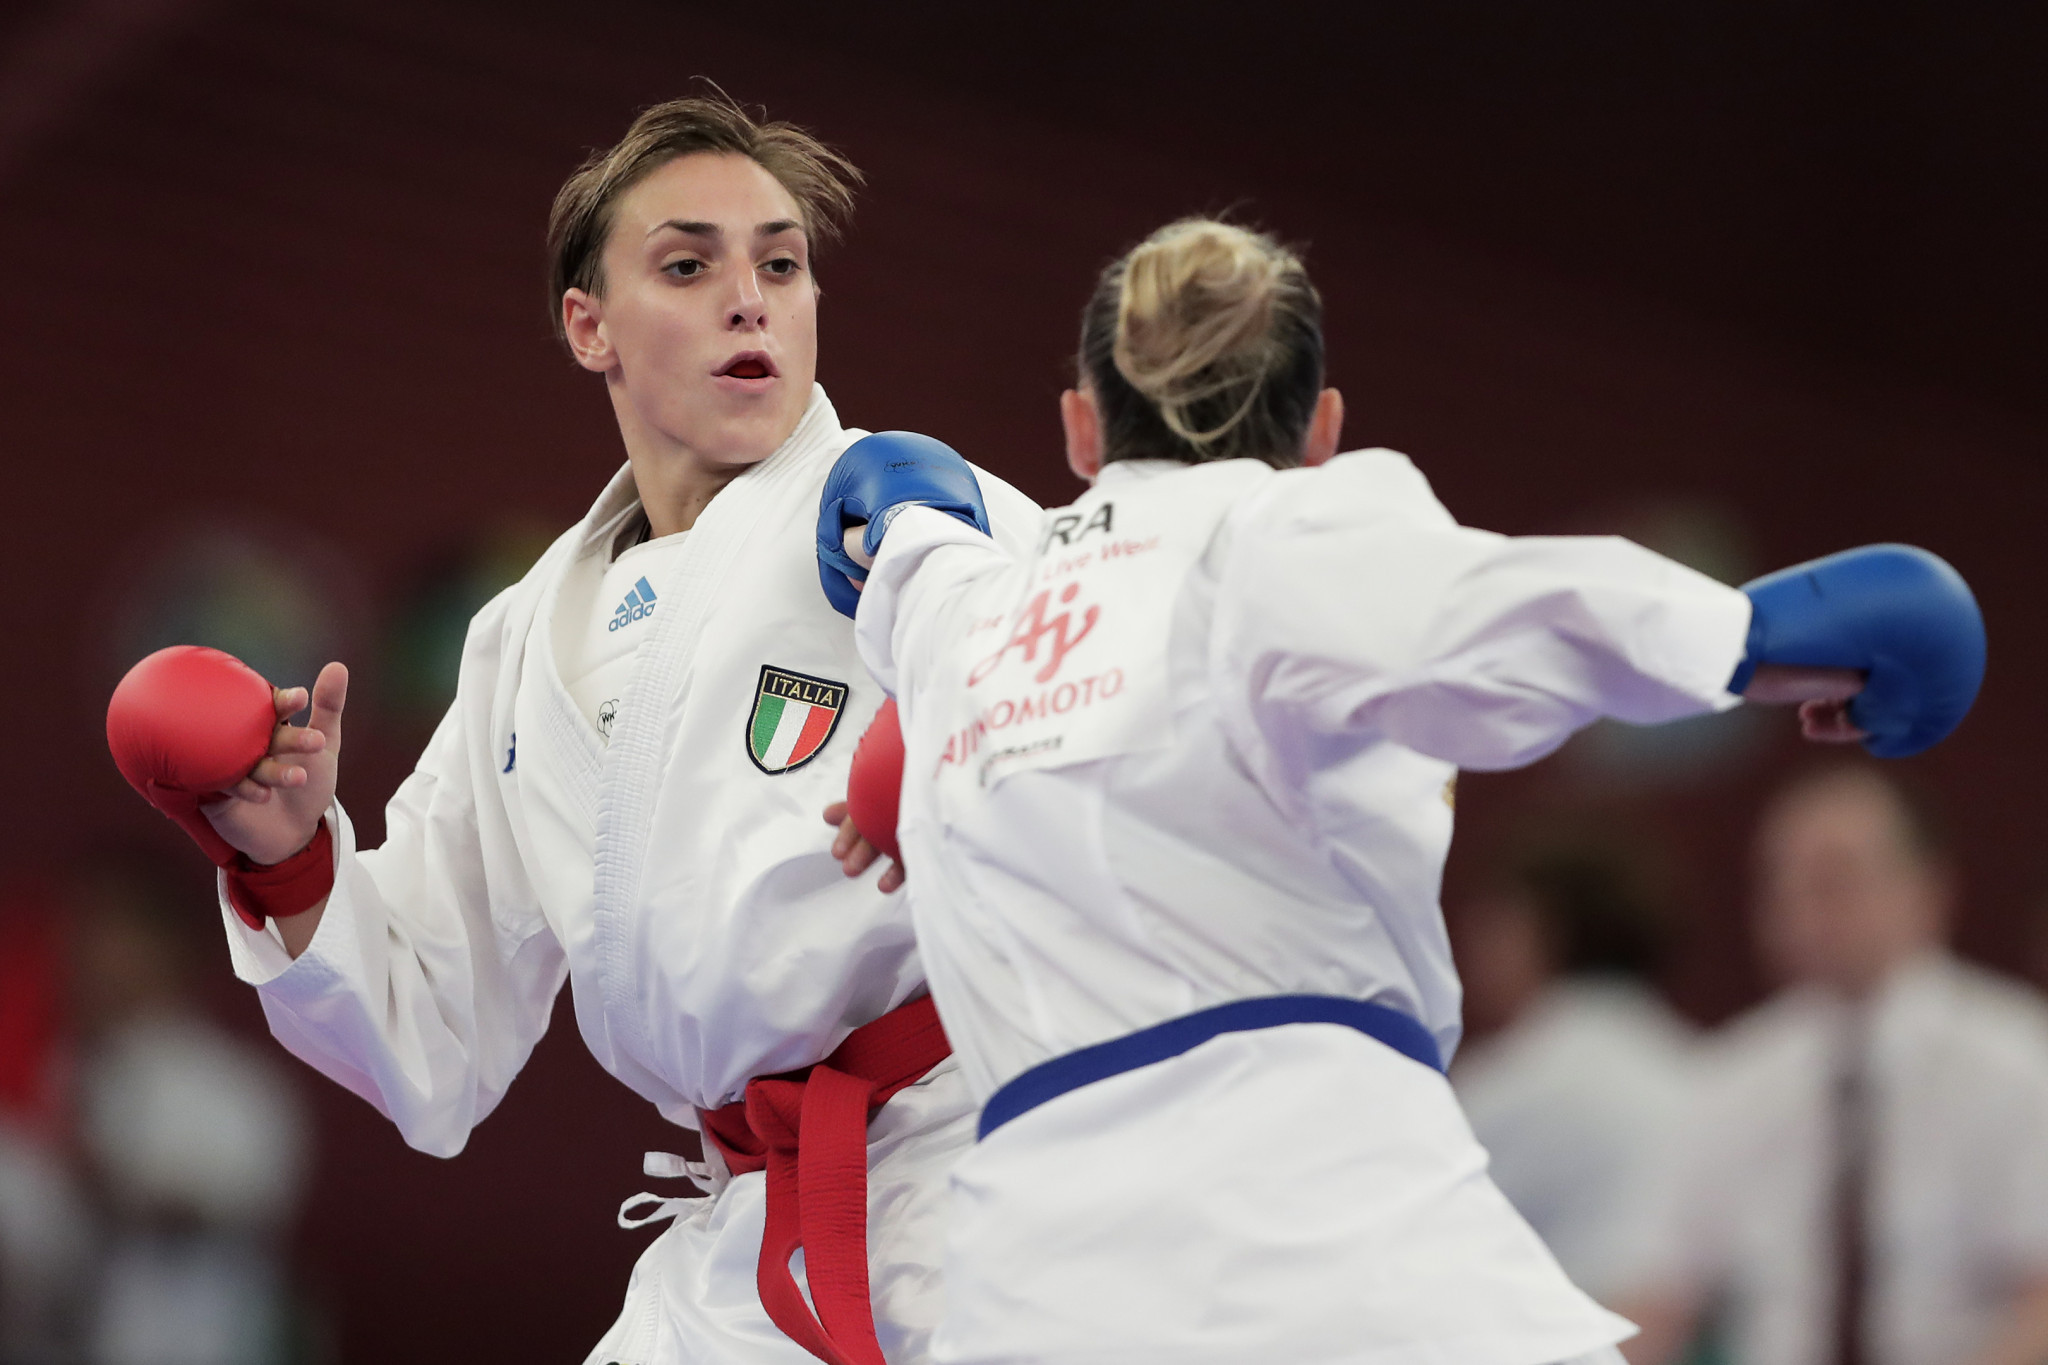 Silvia Semeraro in action during the Karate 1 Premier League at Nippon Budokan in 2019 ©Getty Images